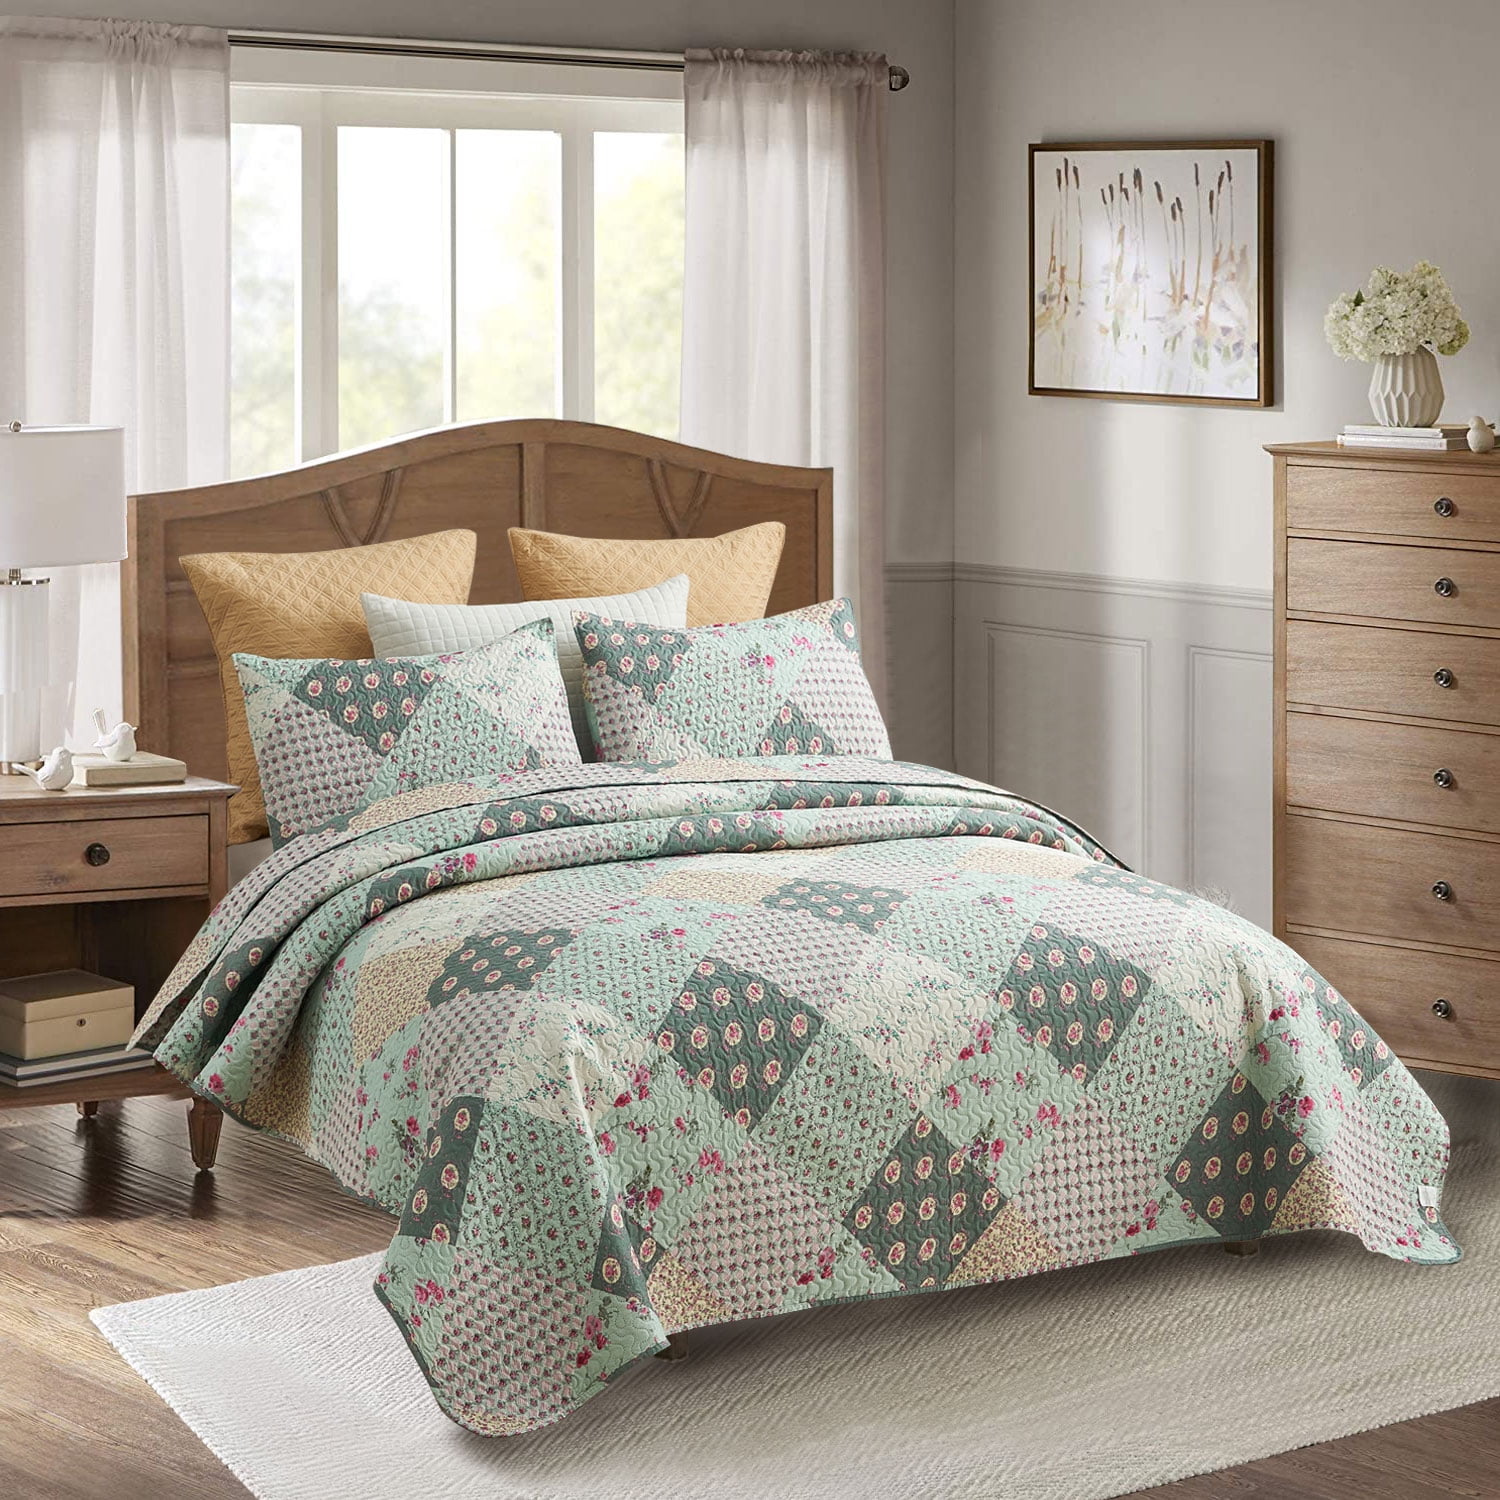 Details about   NEW ~ BEAUTIFUL MODERN CHIC GREY SILVER BROWN GEOMETRIC SOFT COMFORTER SET 